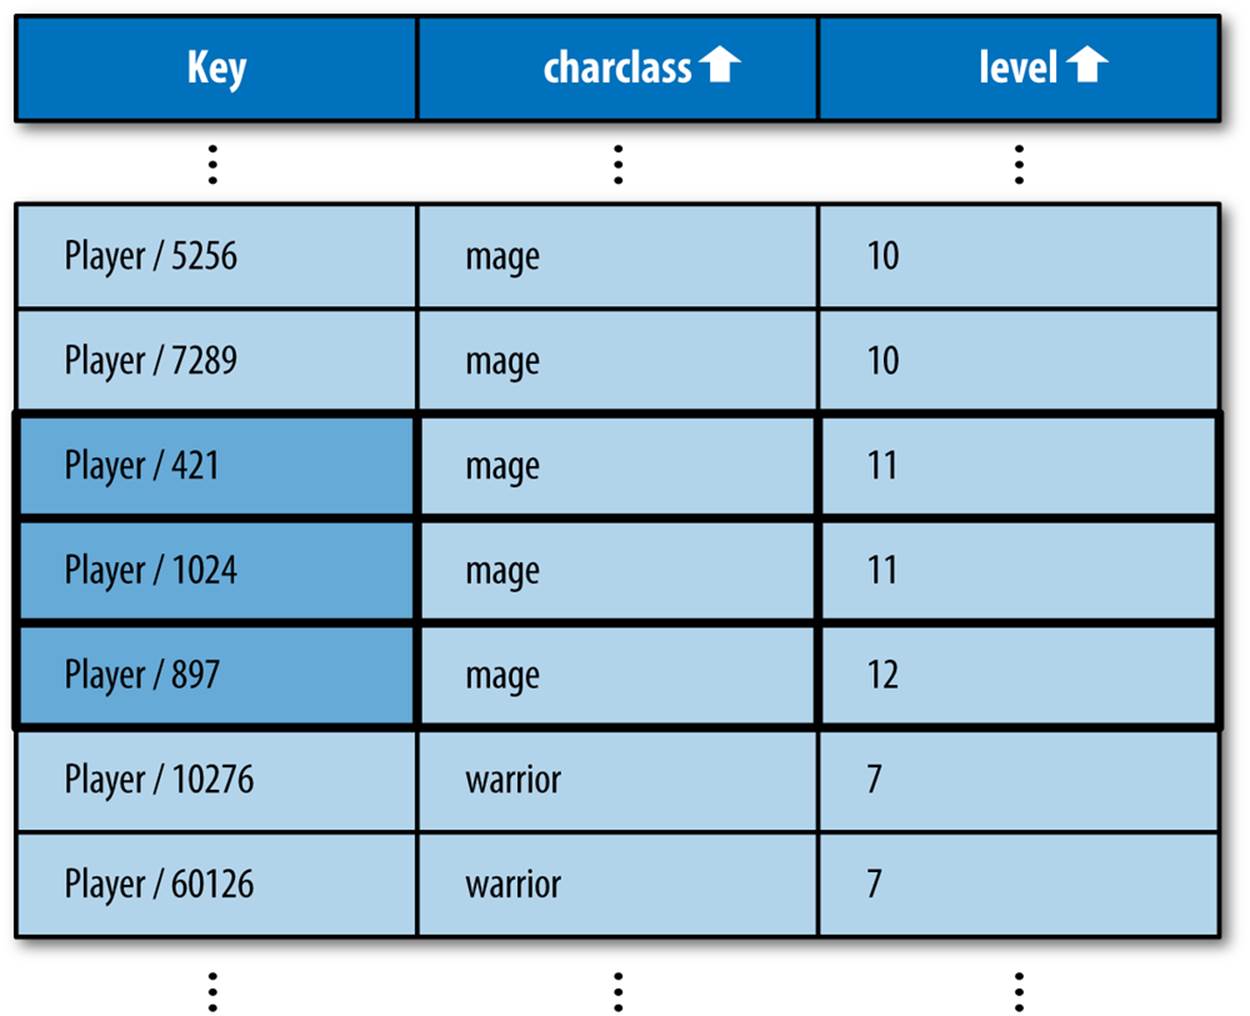 An index of the Player entity “charclass” and “level” properties, sorted by charclass, then level, then key, with results for WHERE charclass = “mage” AND level > 10